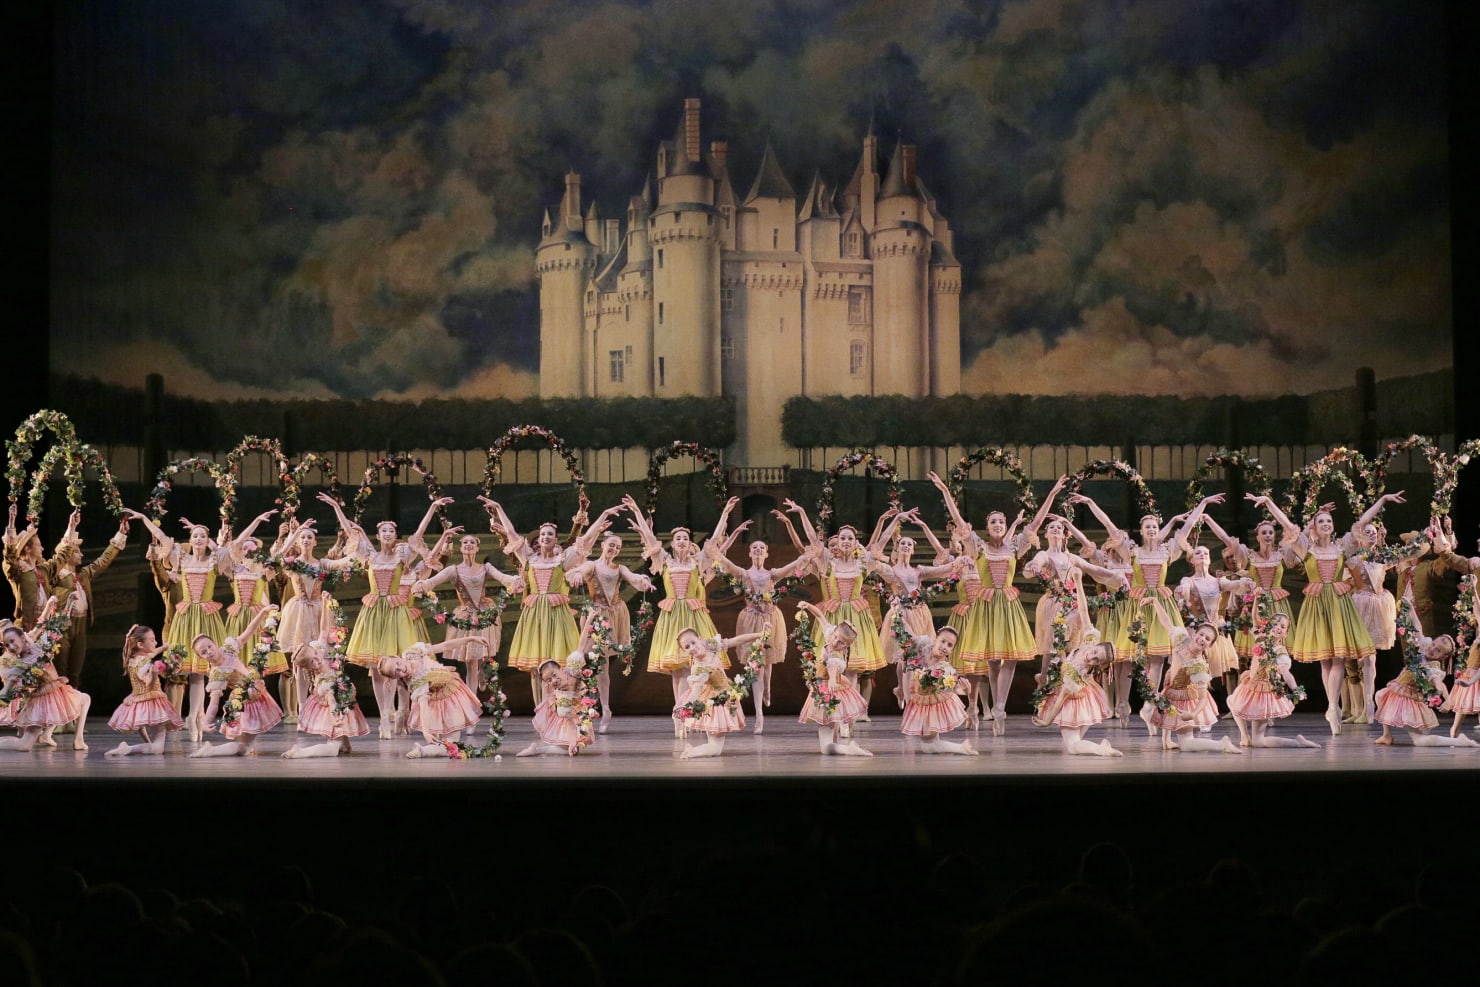 At Chaumet, Rousing 'a Sleeping Beauty' - The New York Times